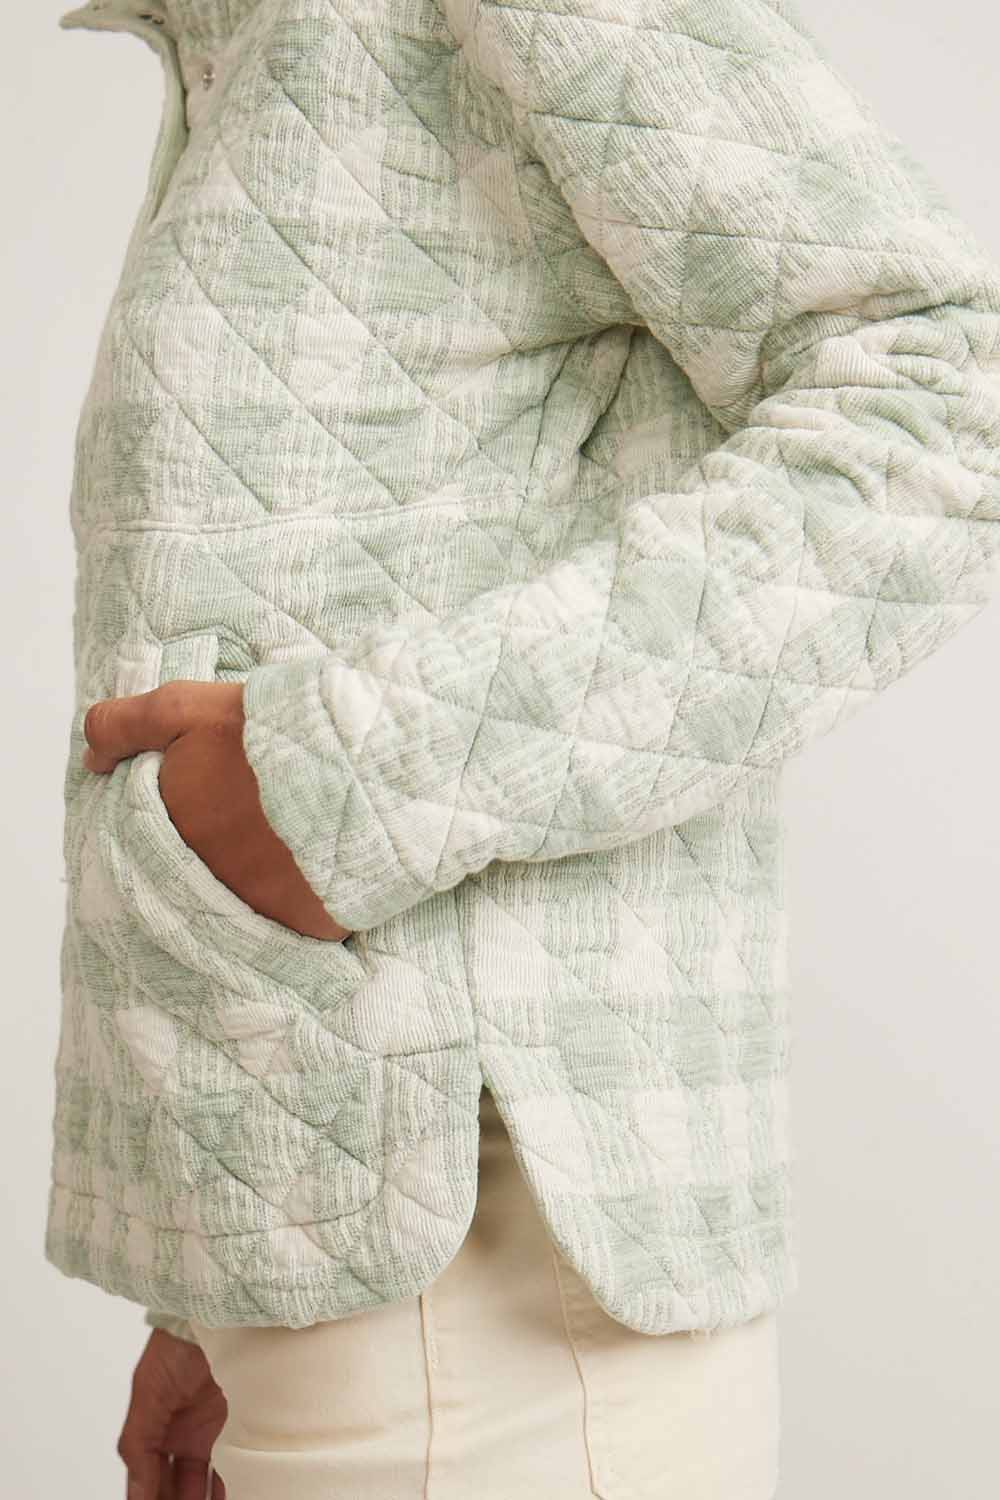 Marine Layer - Iris Quilted Pullover - Mint - Pocket